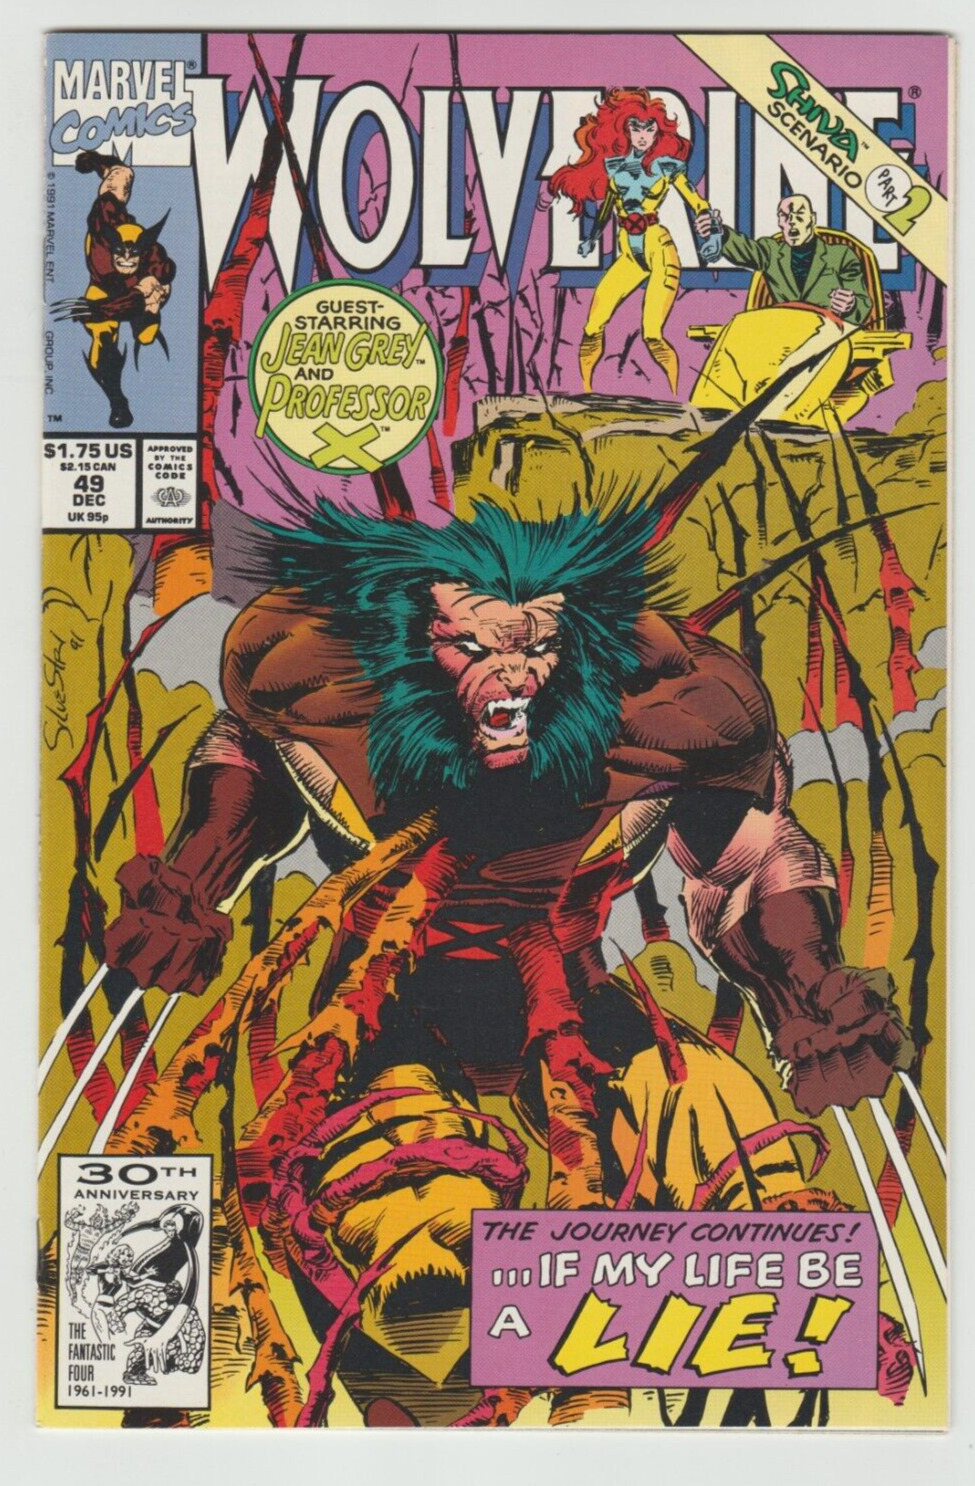 Wolverine #49 Marvel Comics December 1991 If My Life Be A Lie